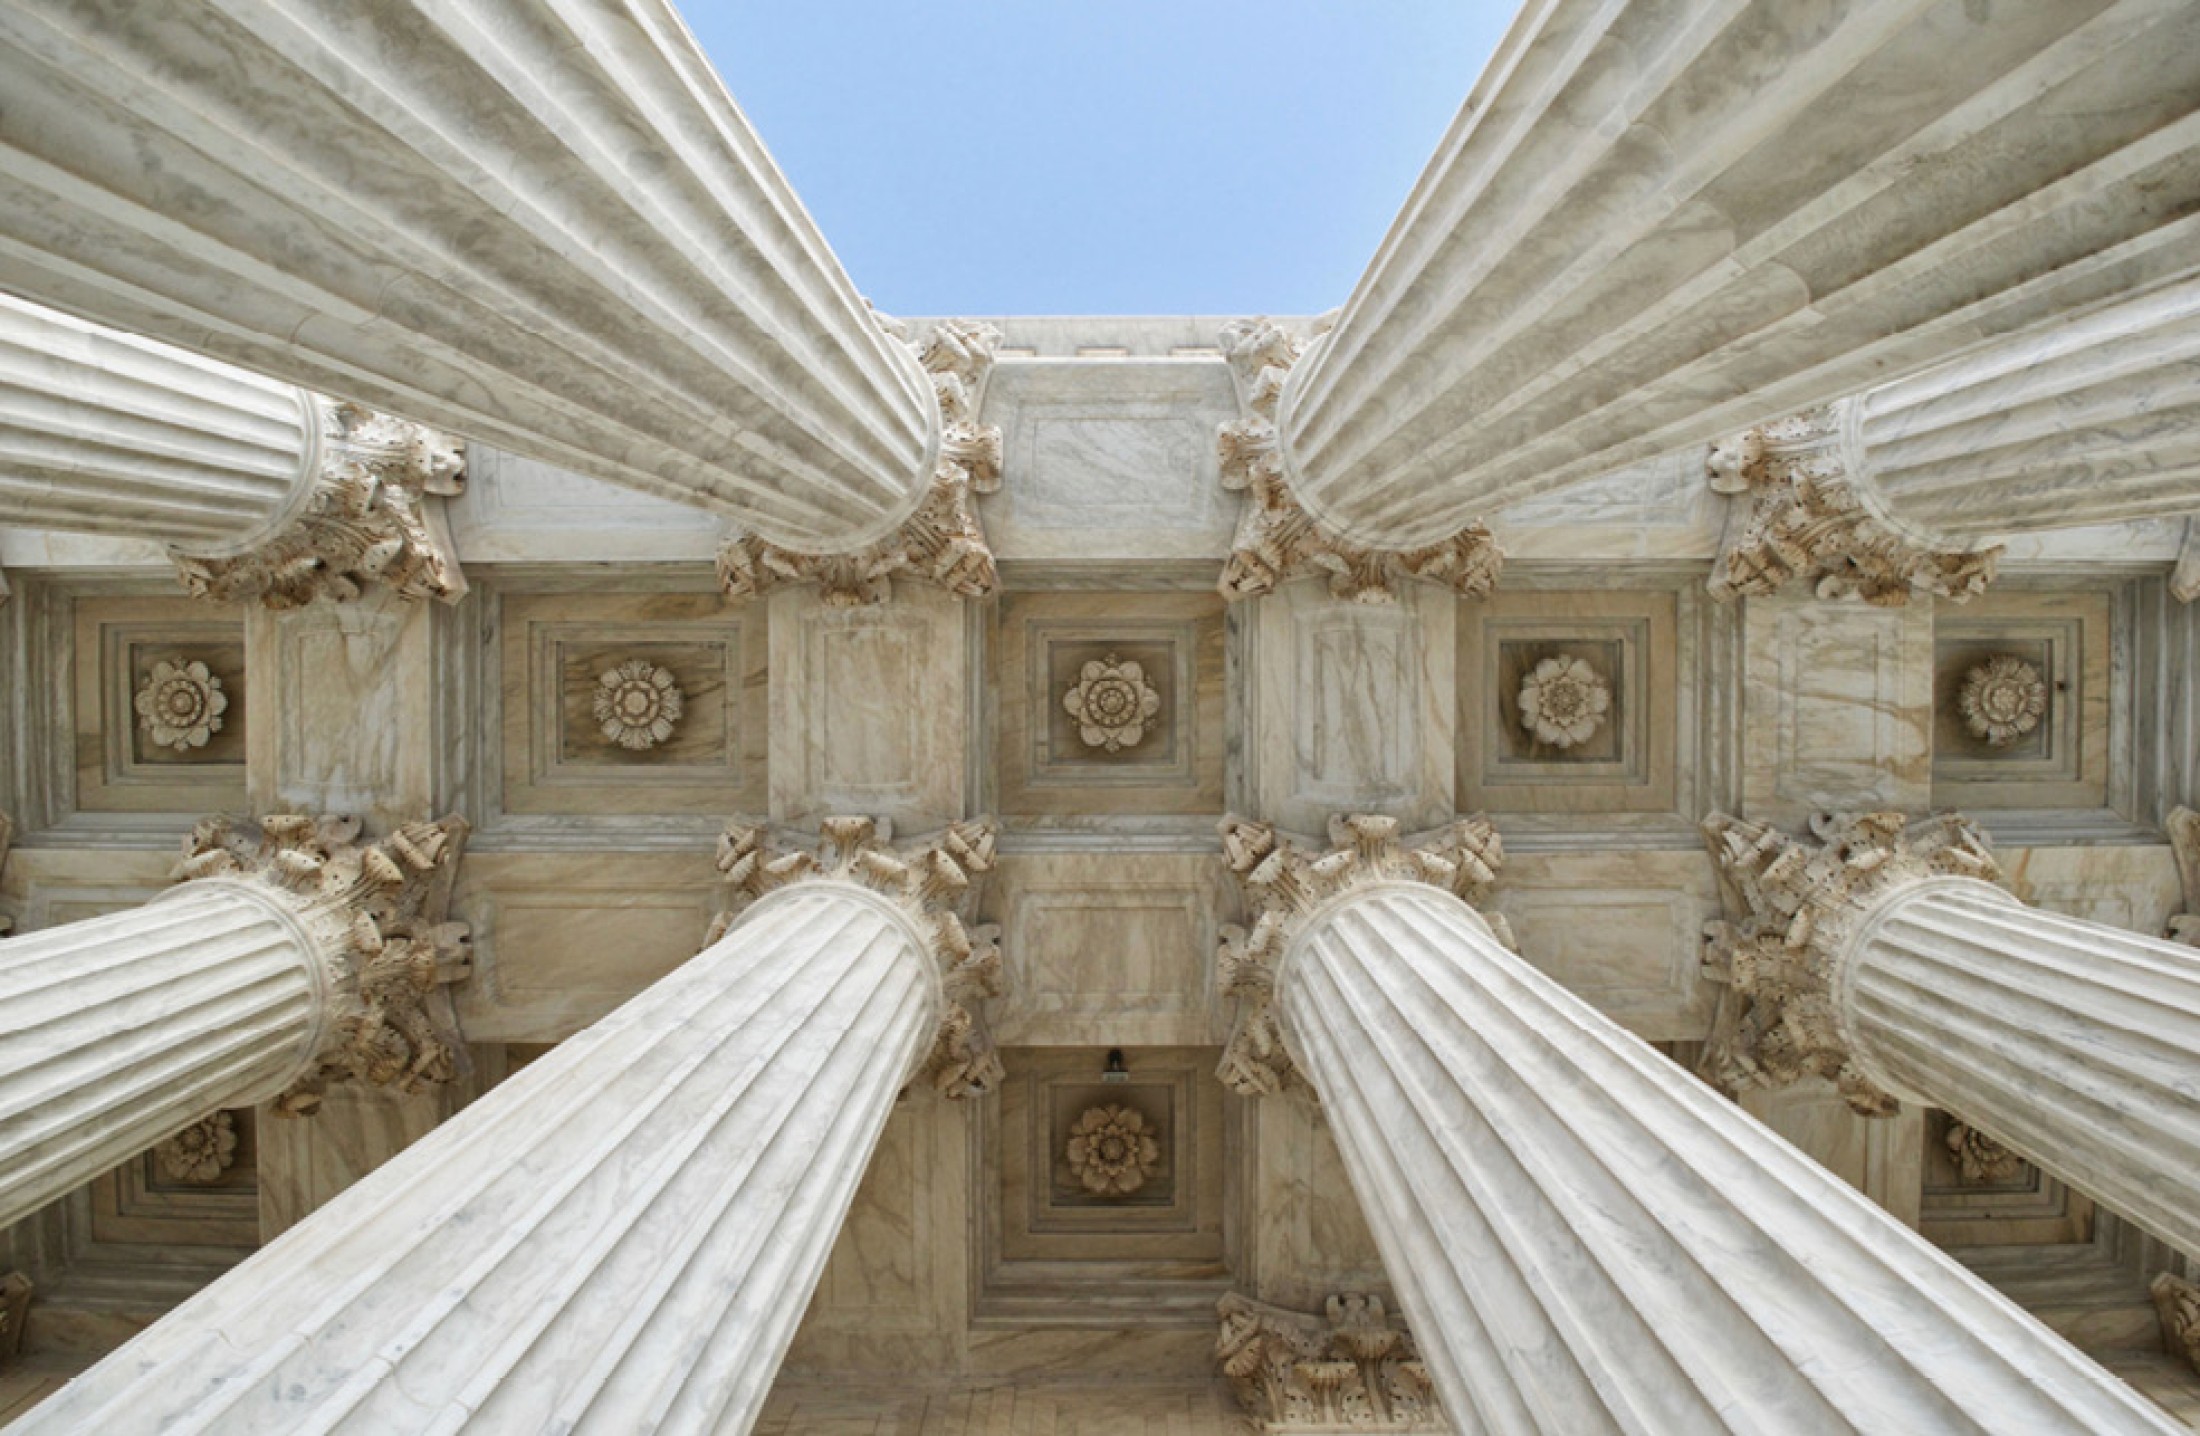 Image of several pillars of a building as seen looking up.